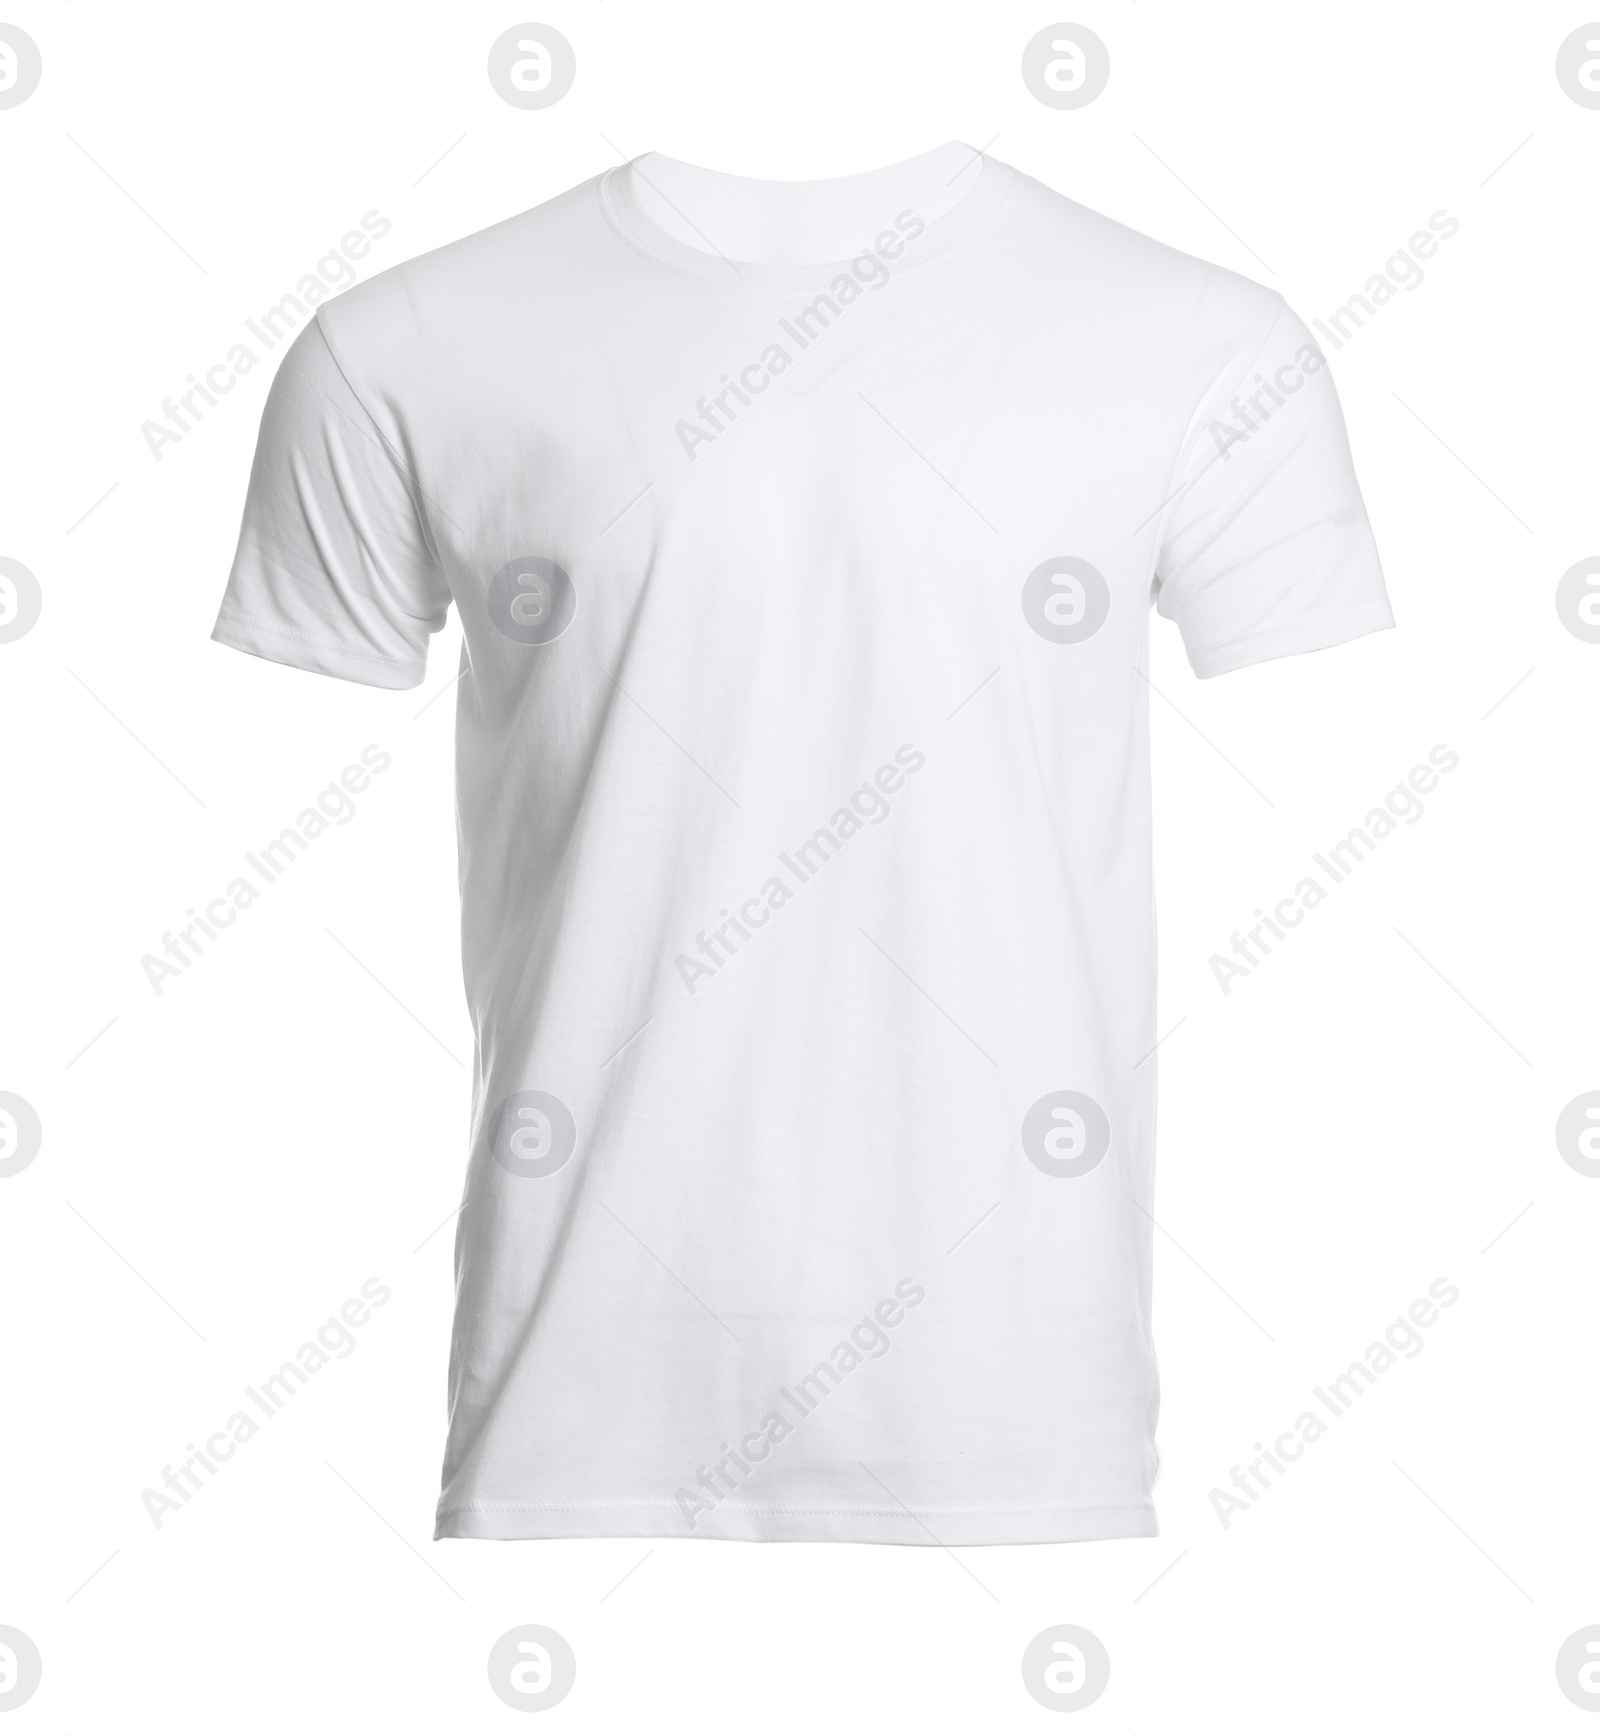 Photo of Mannequin with stylish men's t-shirt isolated on white. Mockup for design